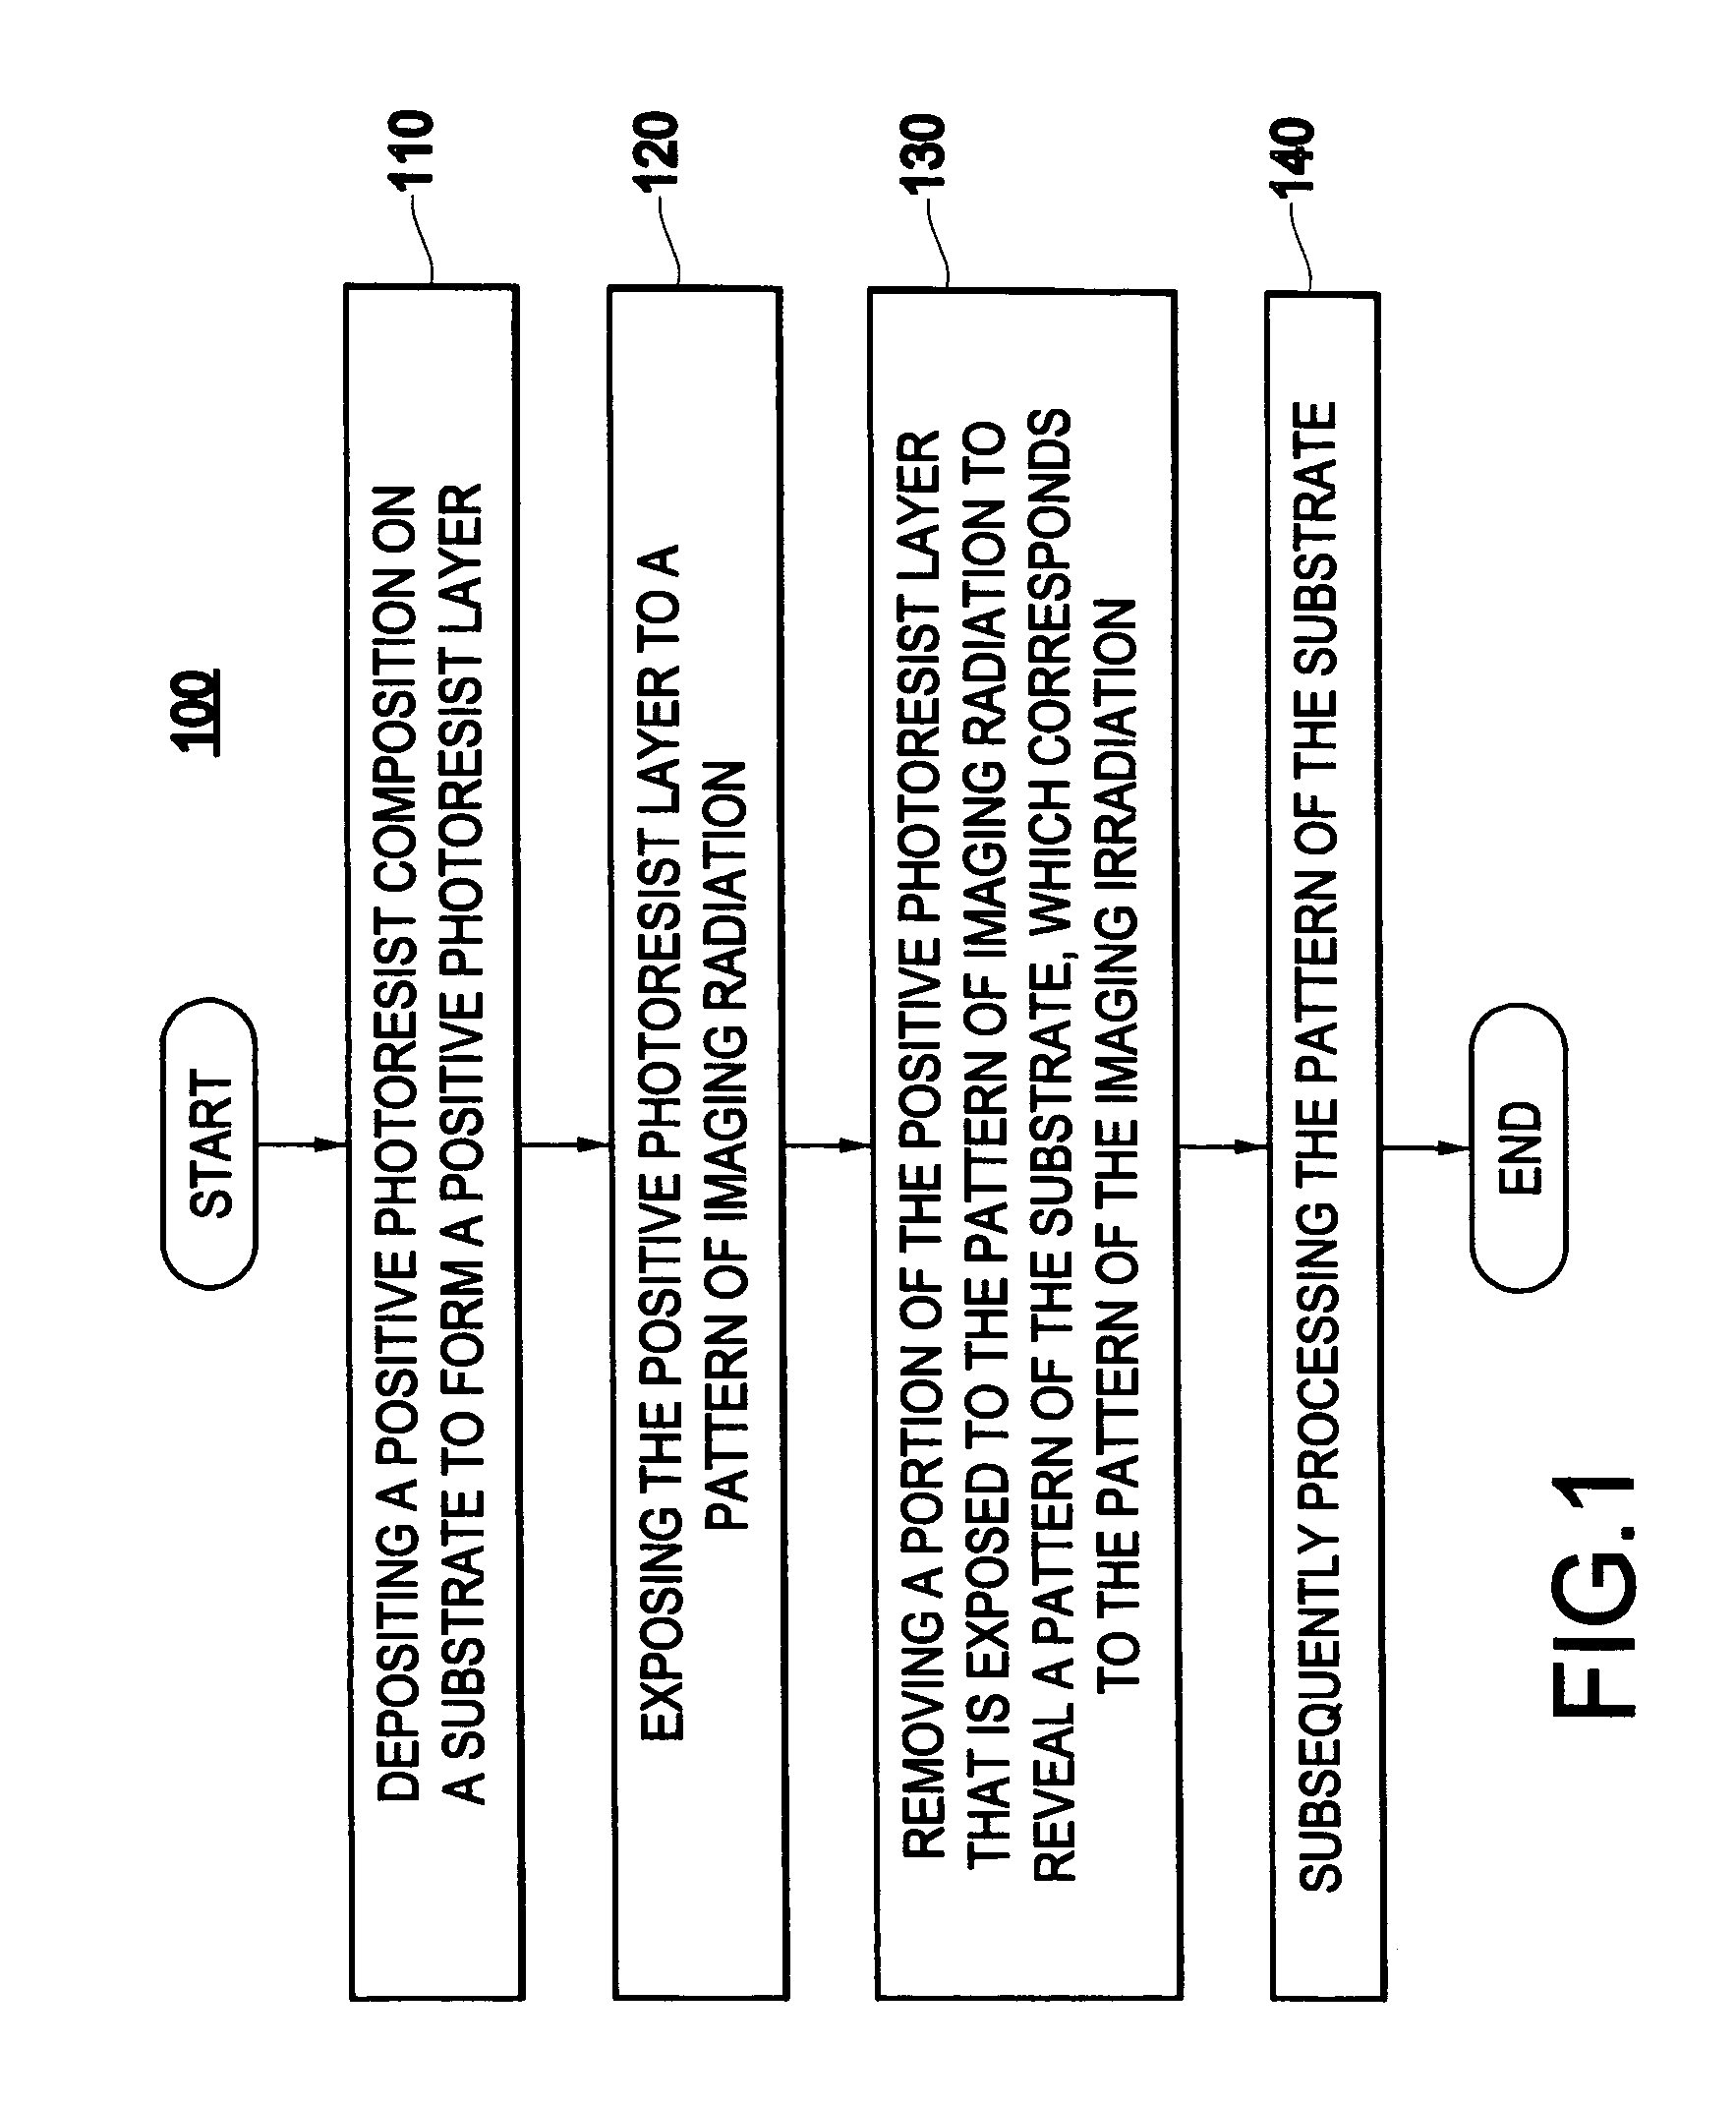 Positive photoresist composition with a polymer including a fluorosulfonamide group and process for its use